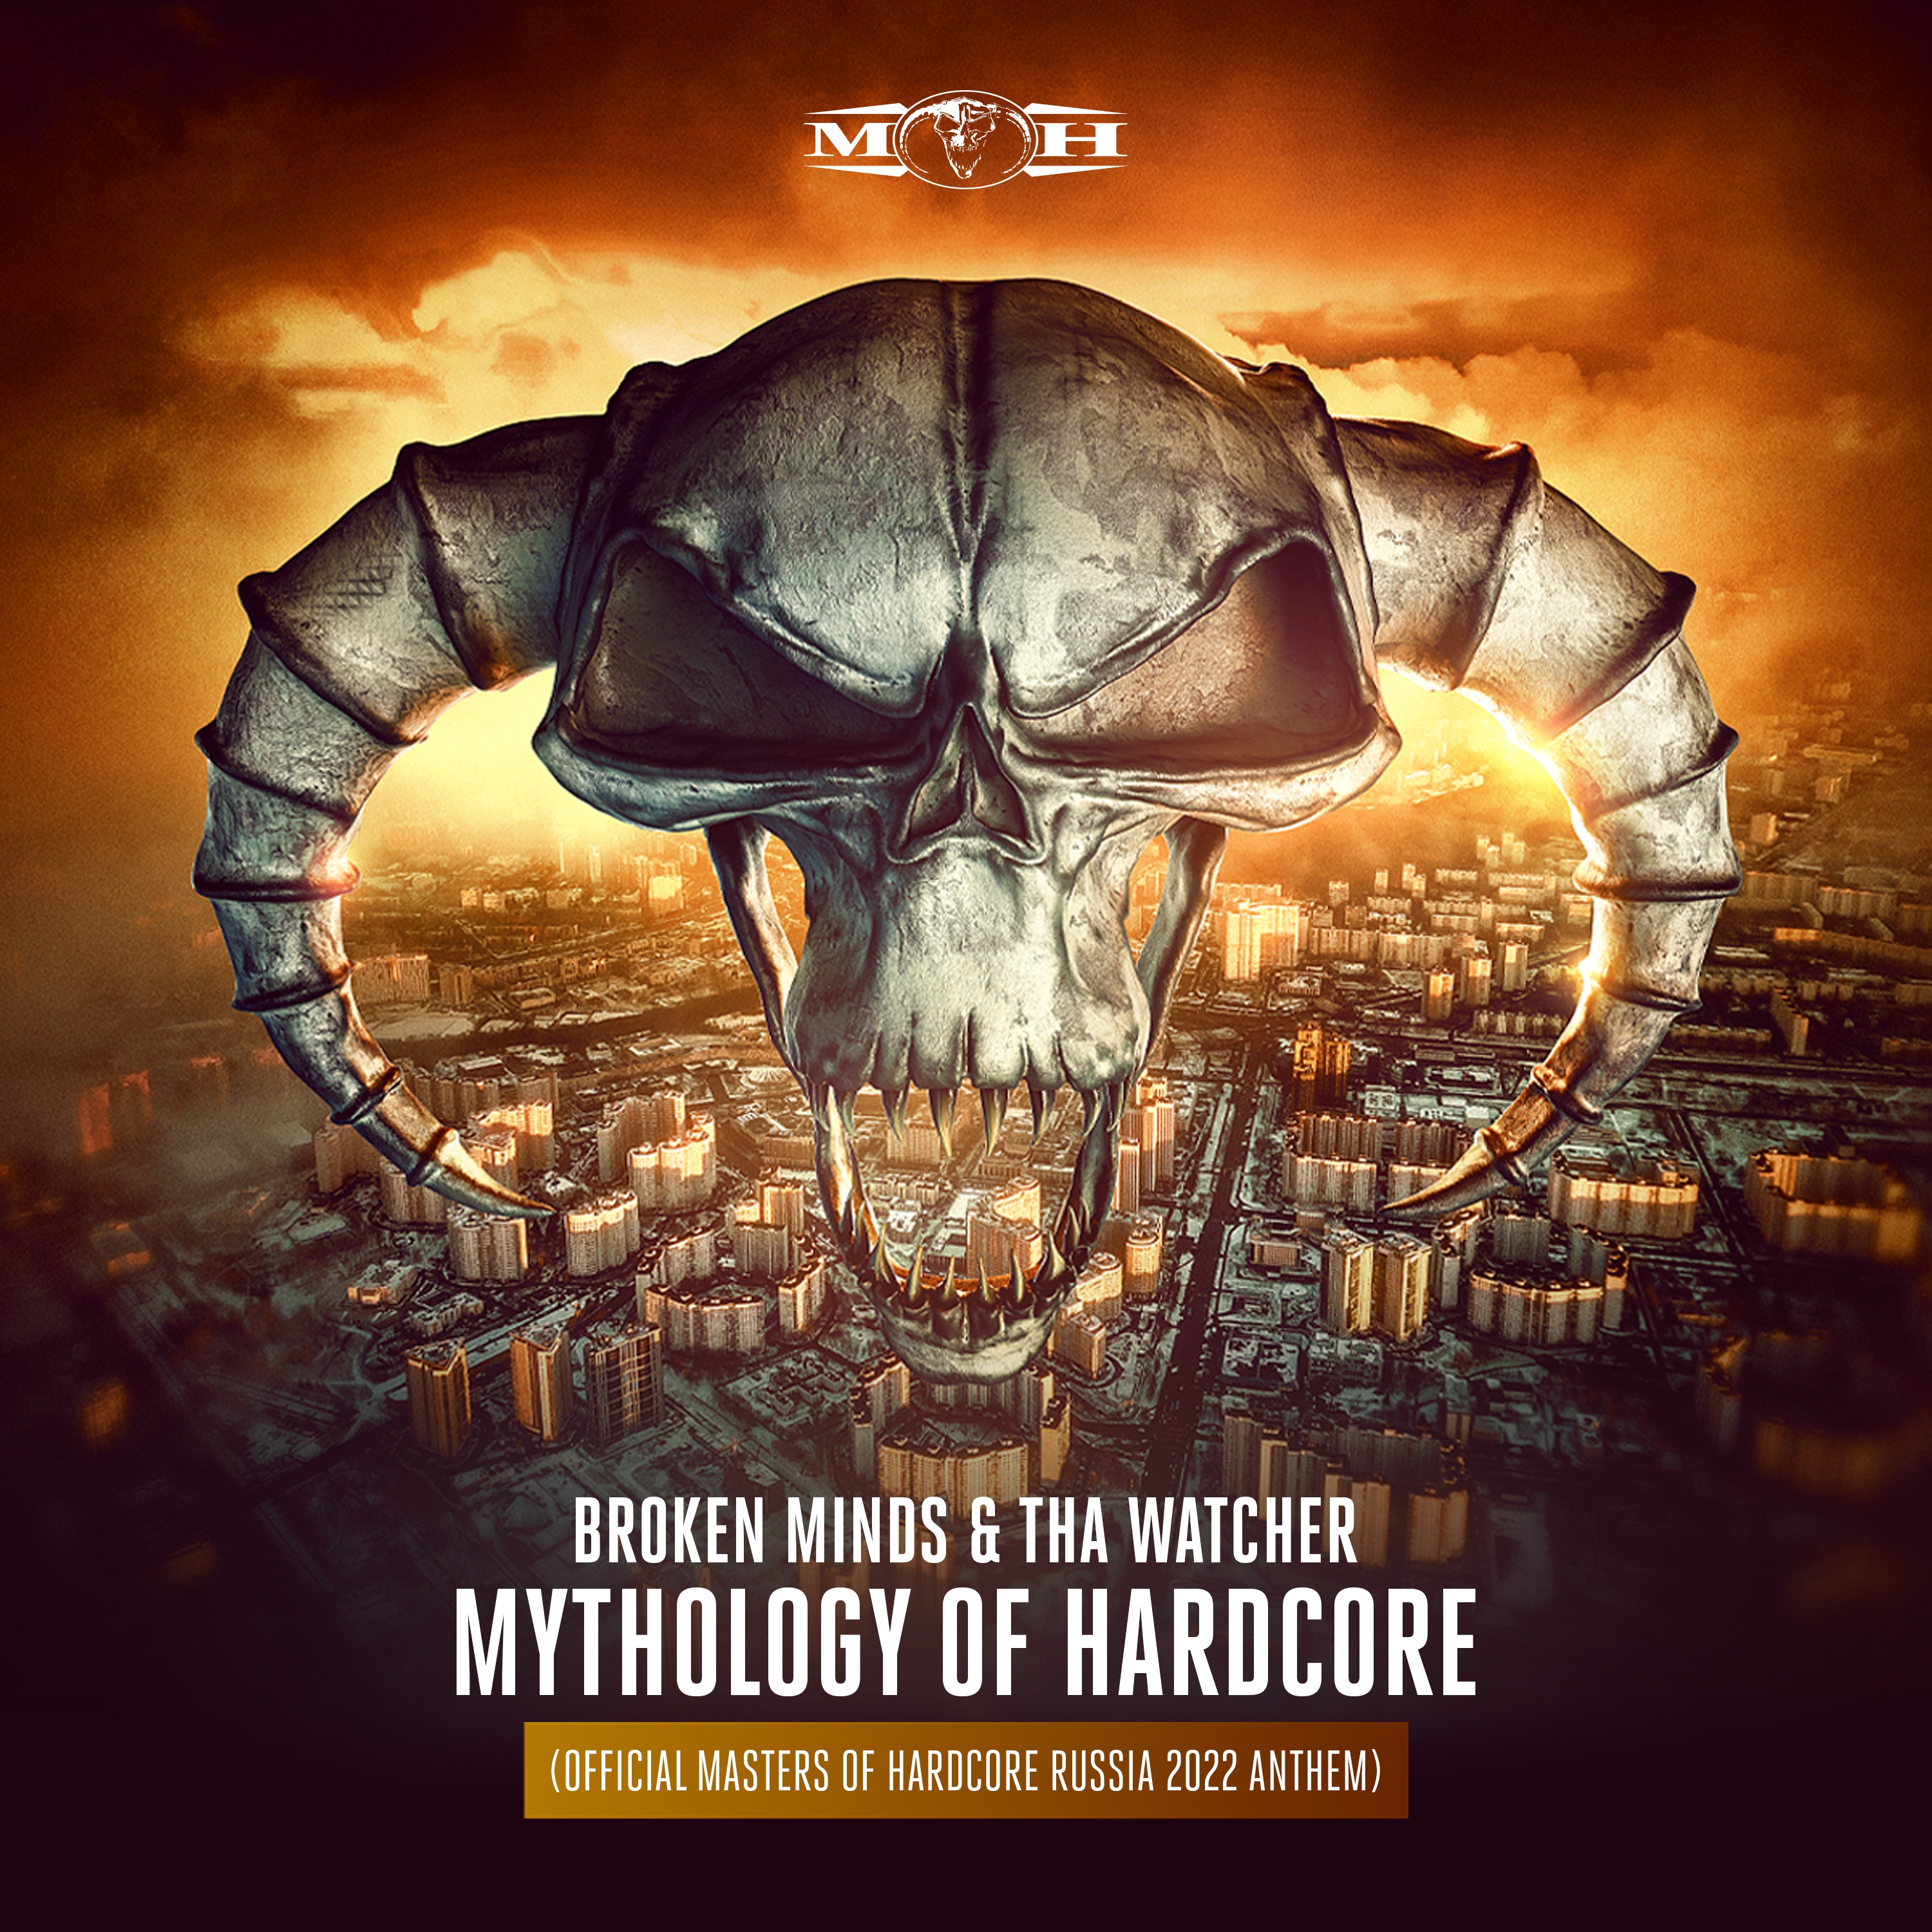 Broken Minds & Tha Watcher - Mythology of Hardcore (Official Masters of  Hardcor - MP3 and WAV downloads at Hardtunes